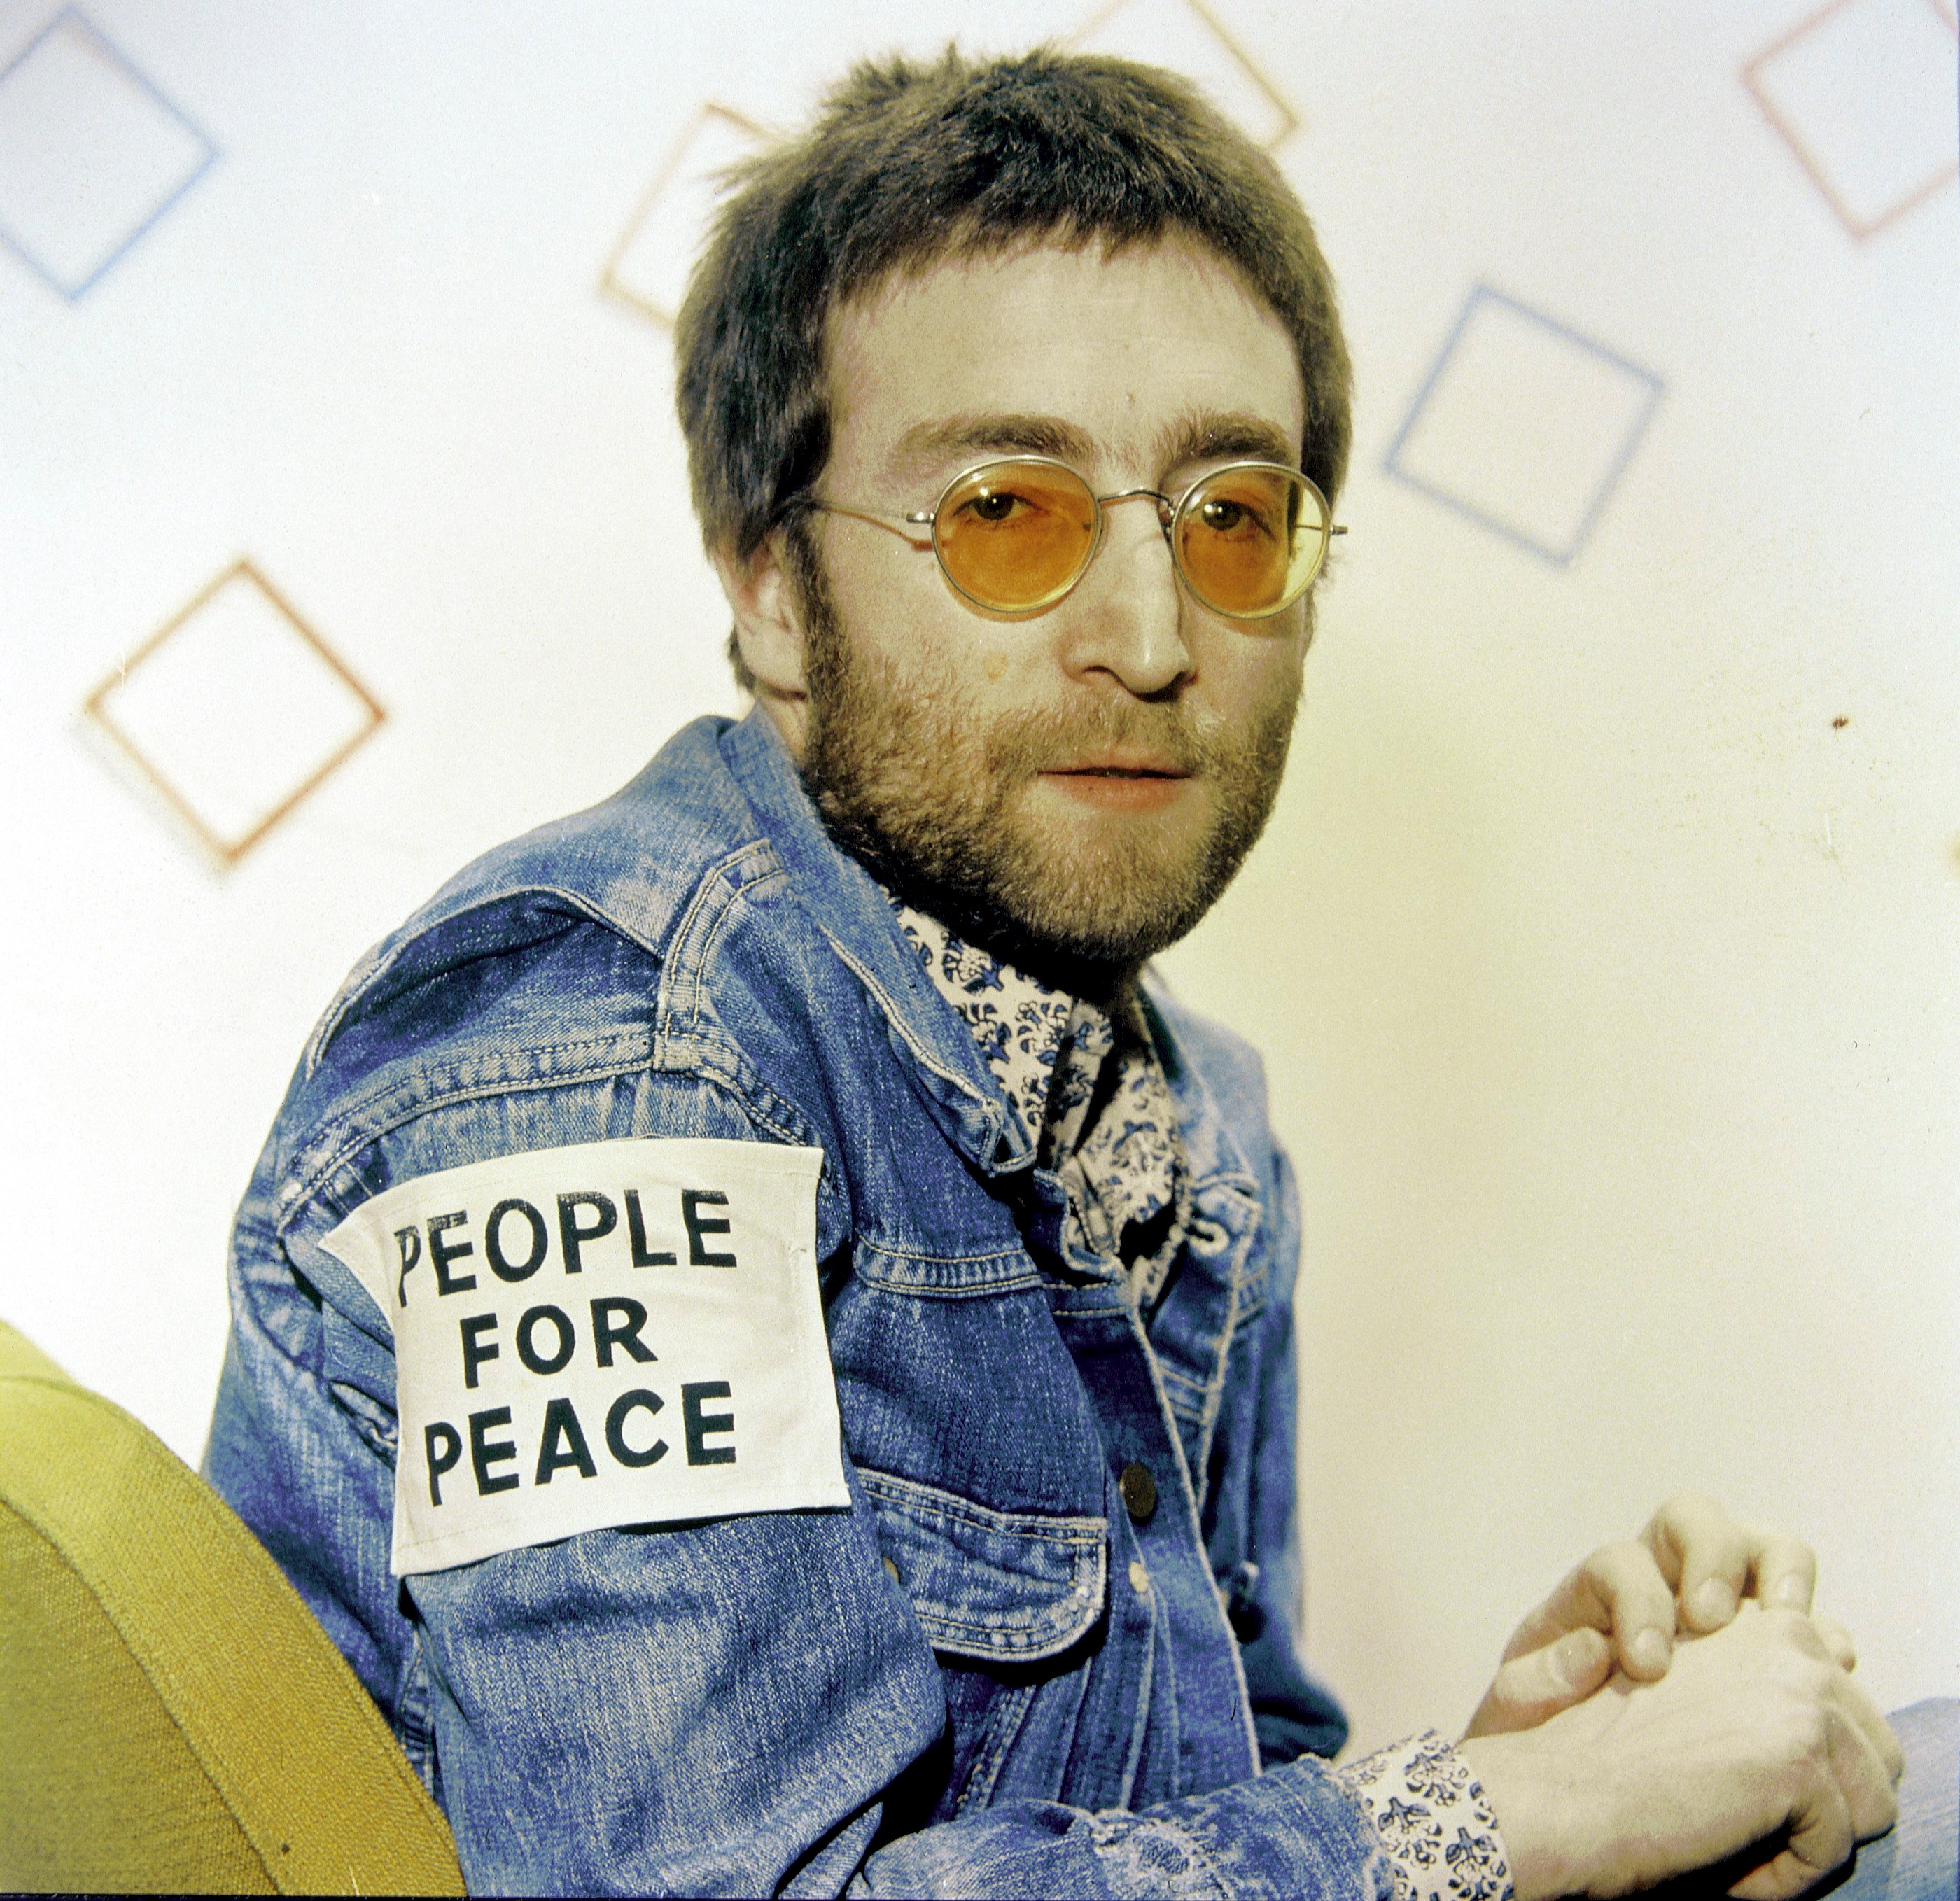 The Beatles' John Lennon wearing a "People for Peace" patch